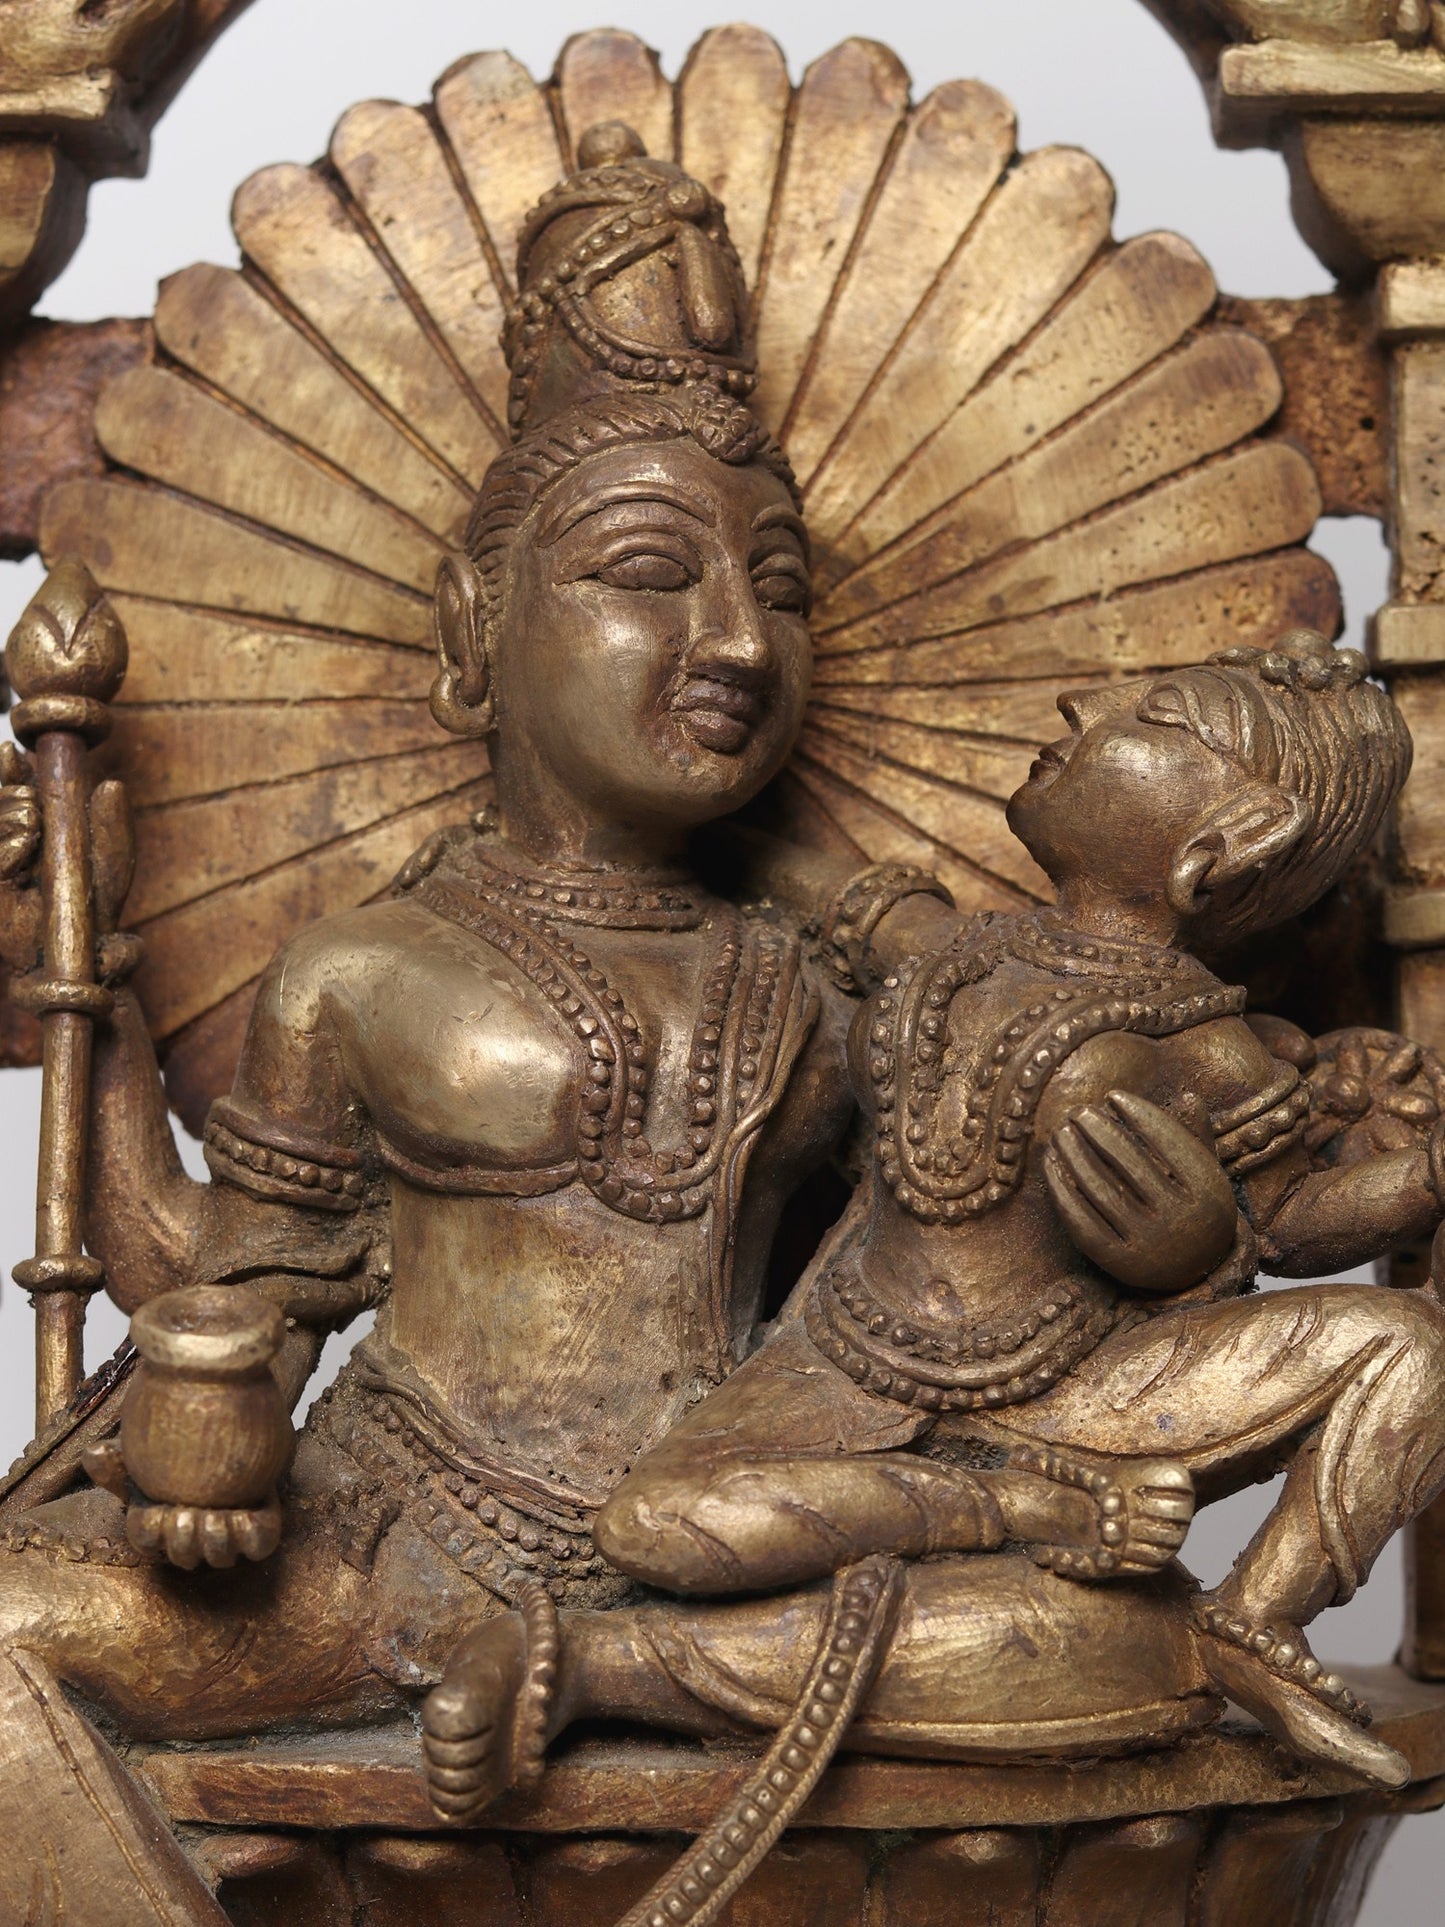 Bronze Shiva and Parvati Idol Seated On Throne In The Divine Residence of Kailasa